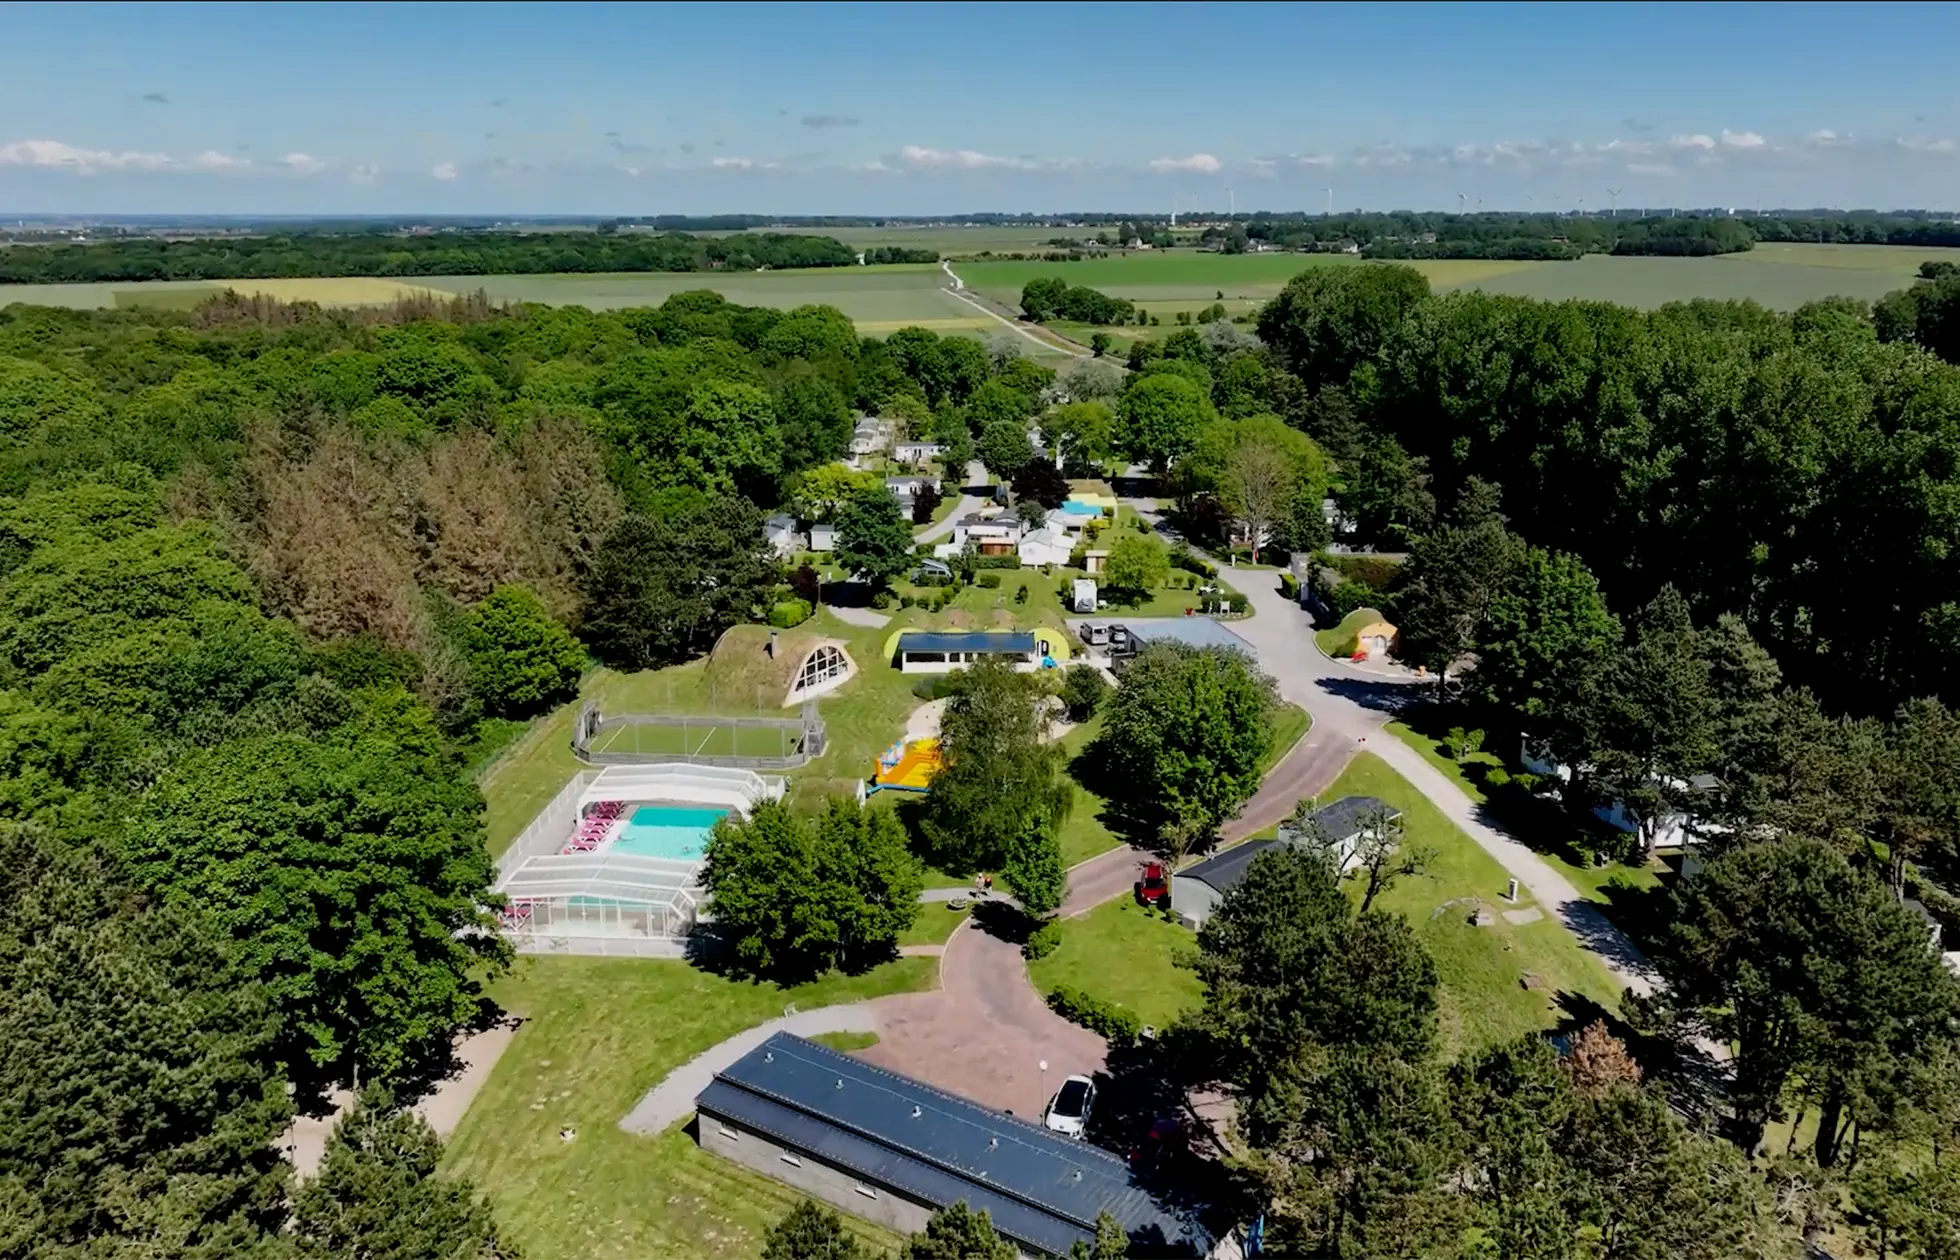 offer ' - '01 - Camping Le Rompval - Situation